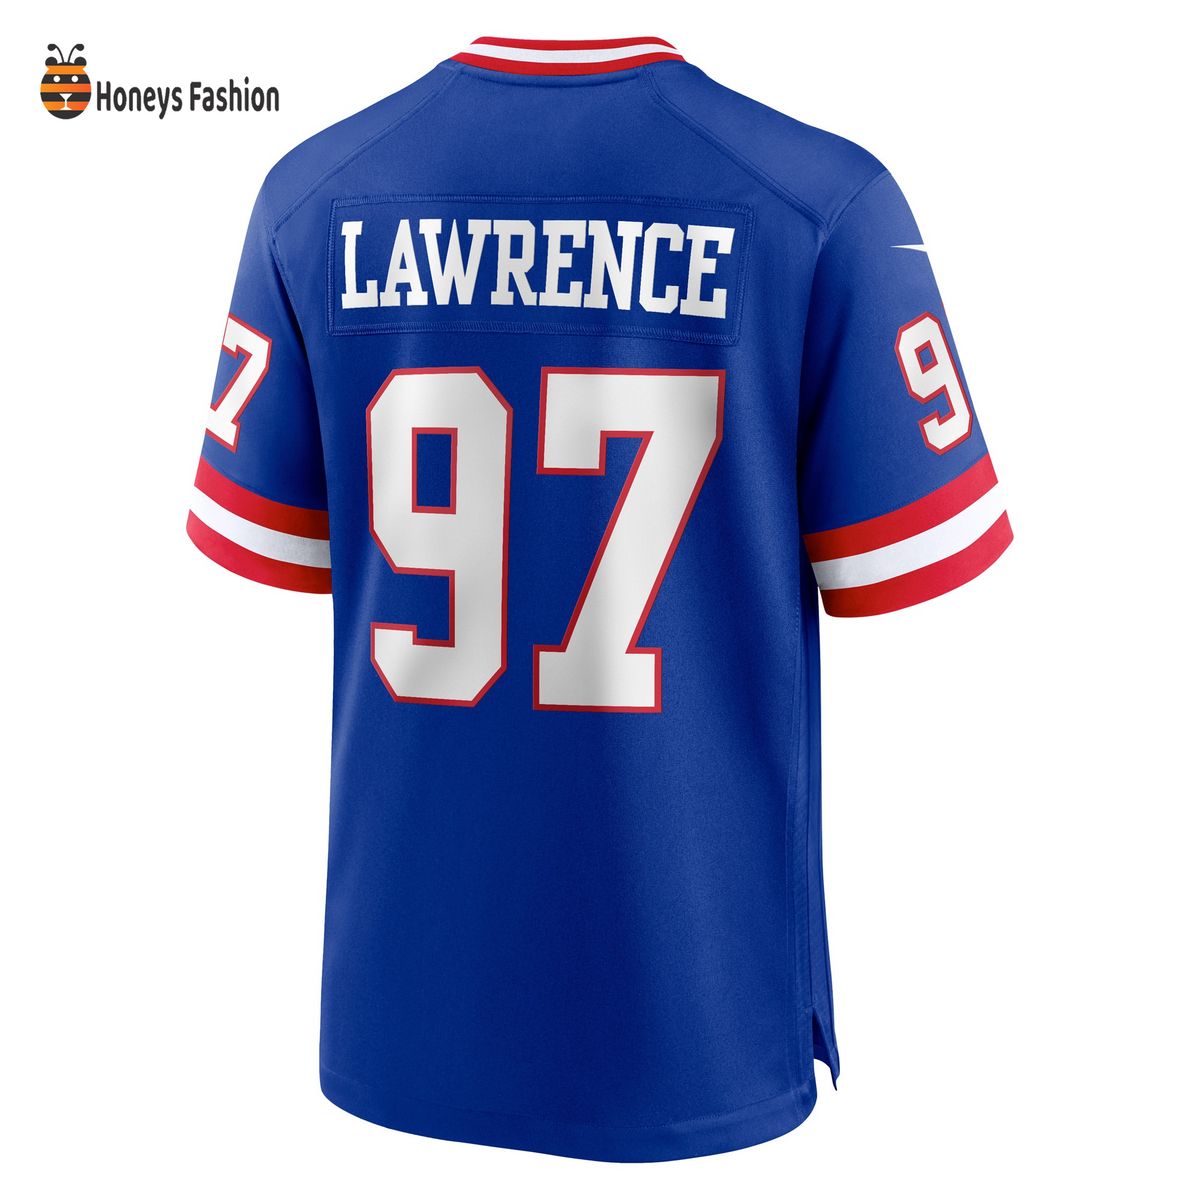 Men’s New York Giants Dexter Lawrence Nike Royal Classic Player Game Jersey